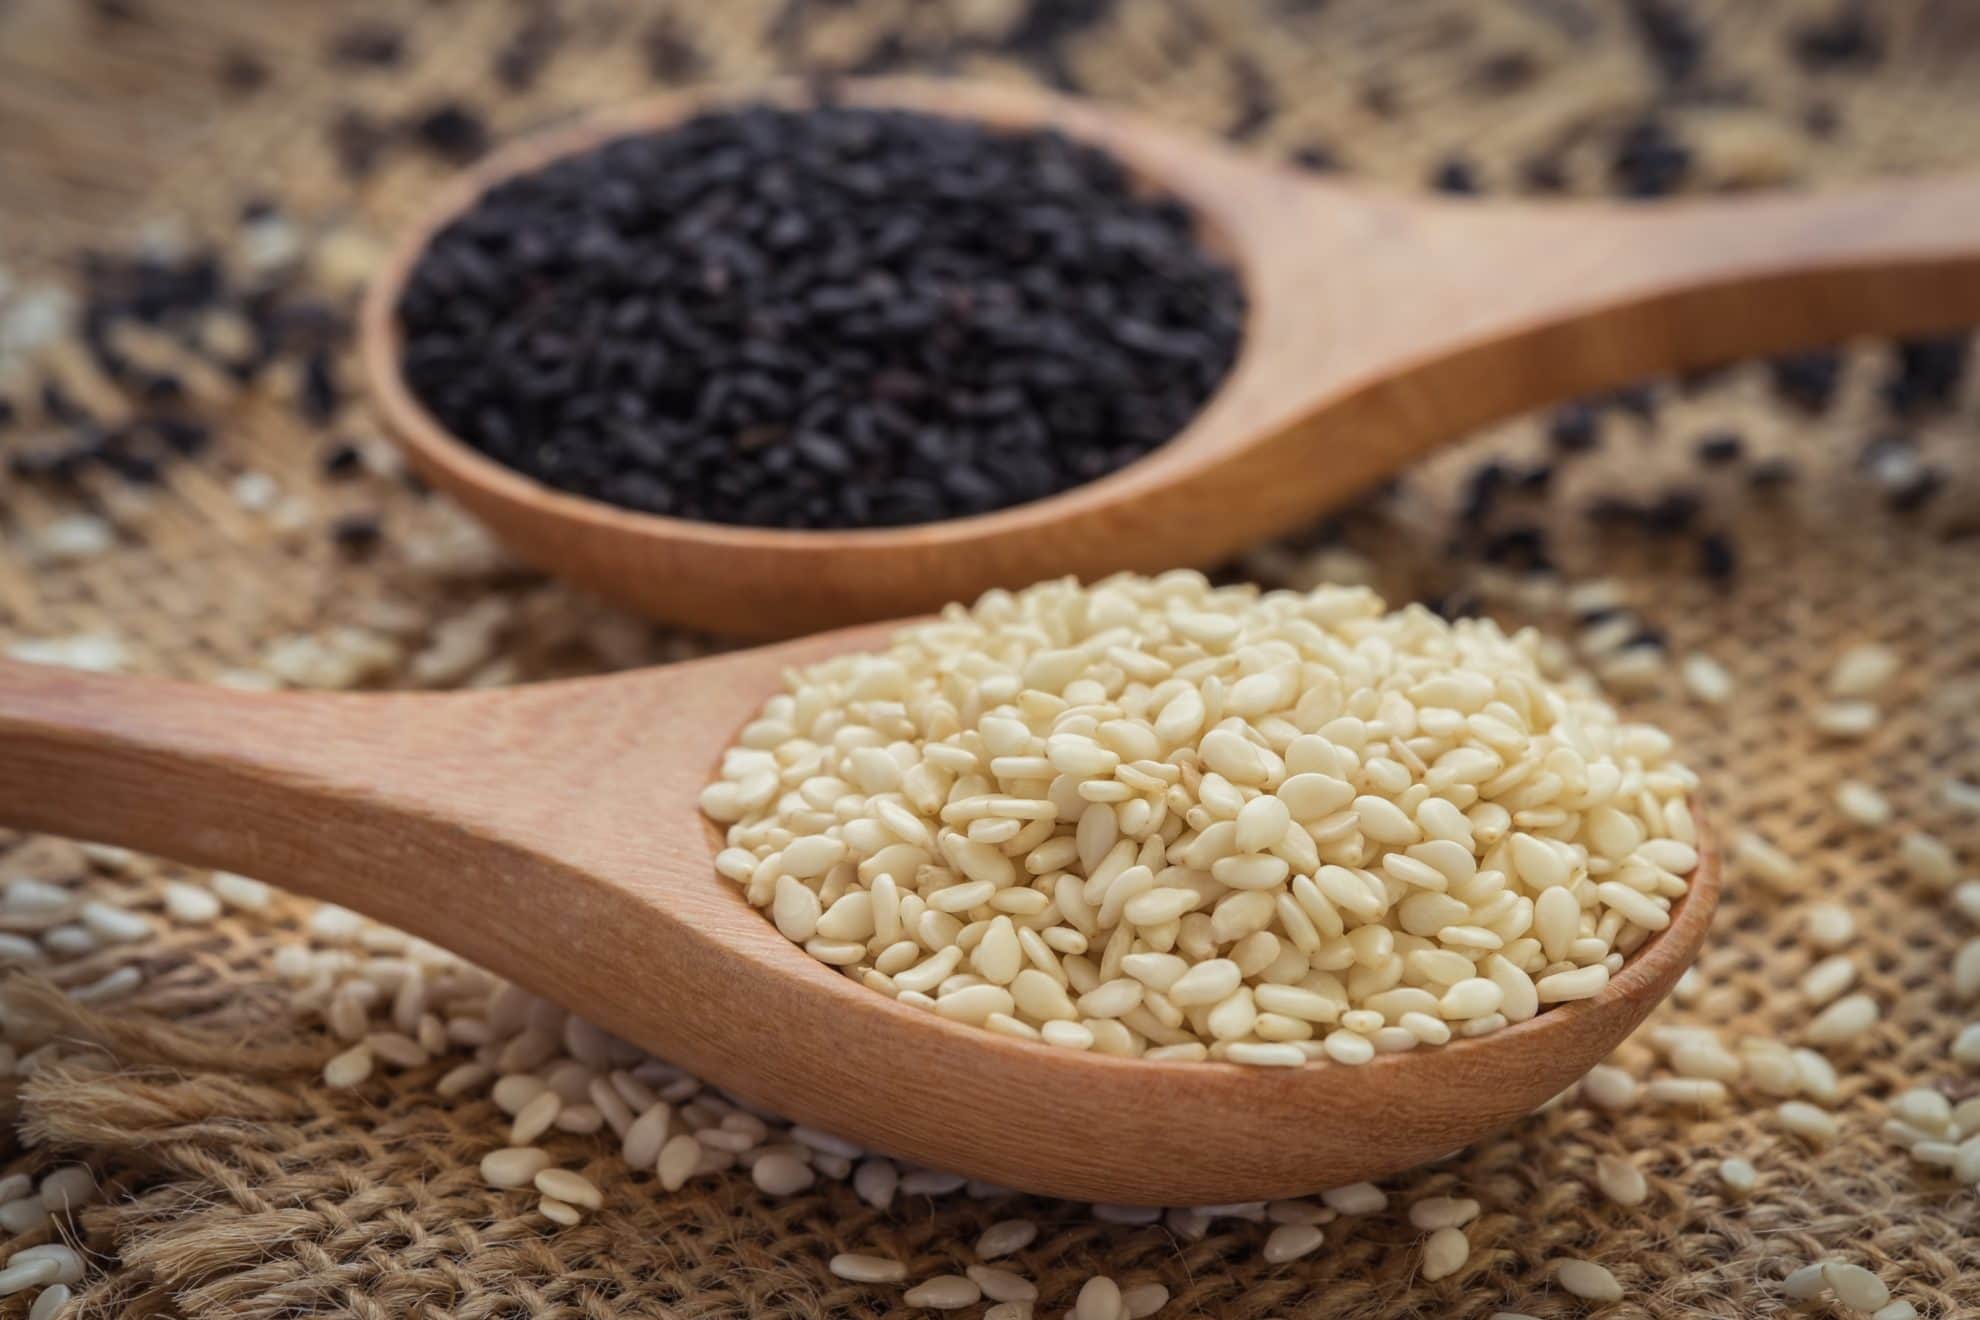 Sesame seeds are a great source of healthy nutrients, and amazing health benefits too.